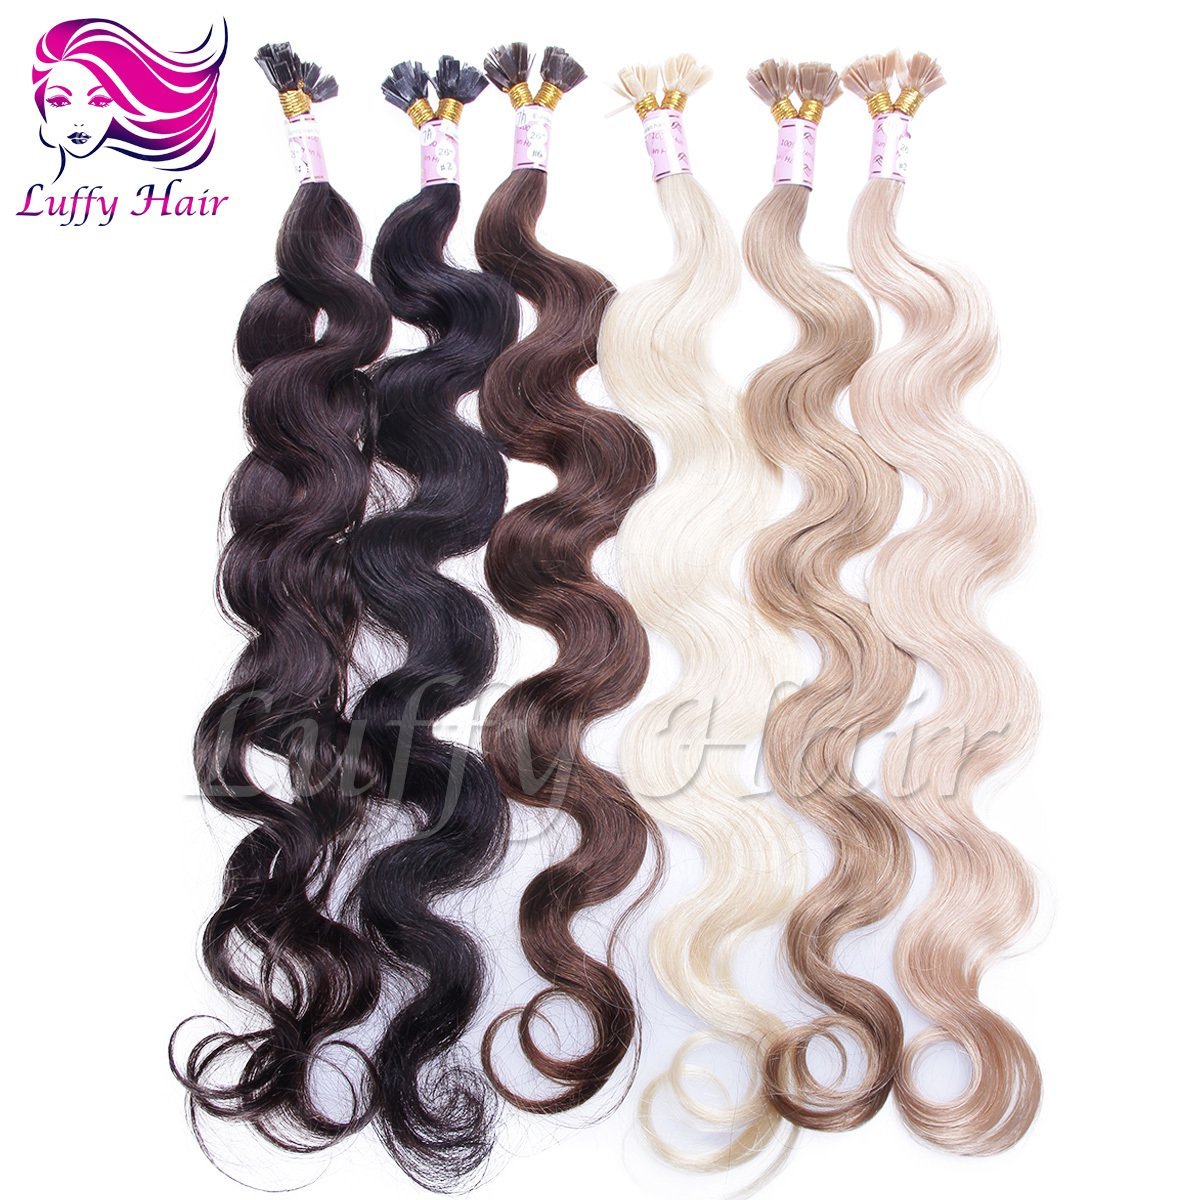 Body Wave Fusion Hair Extensions - KFL008